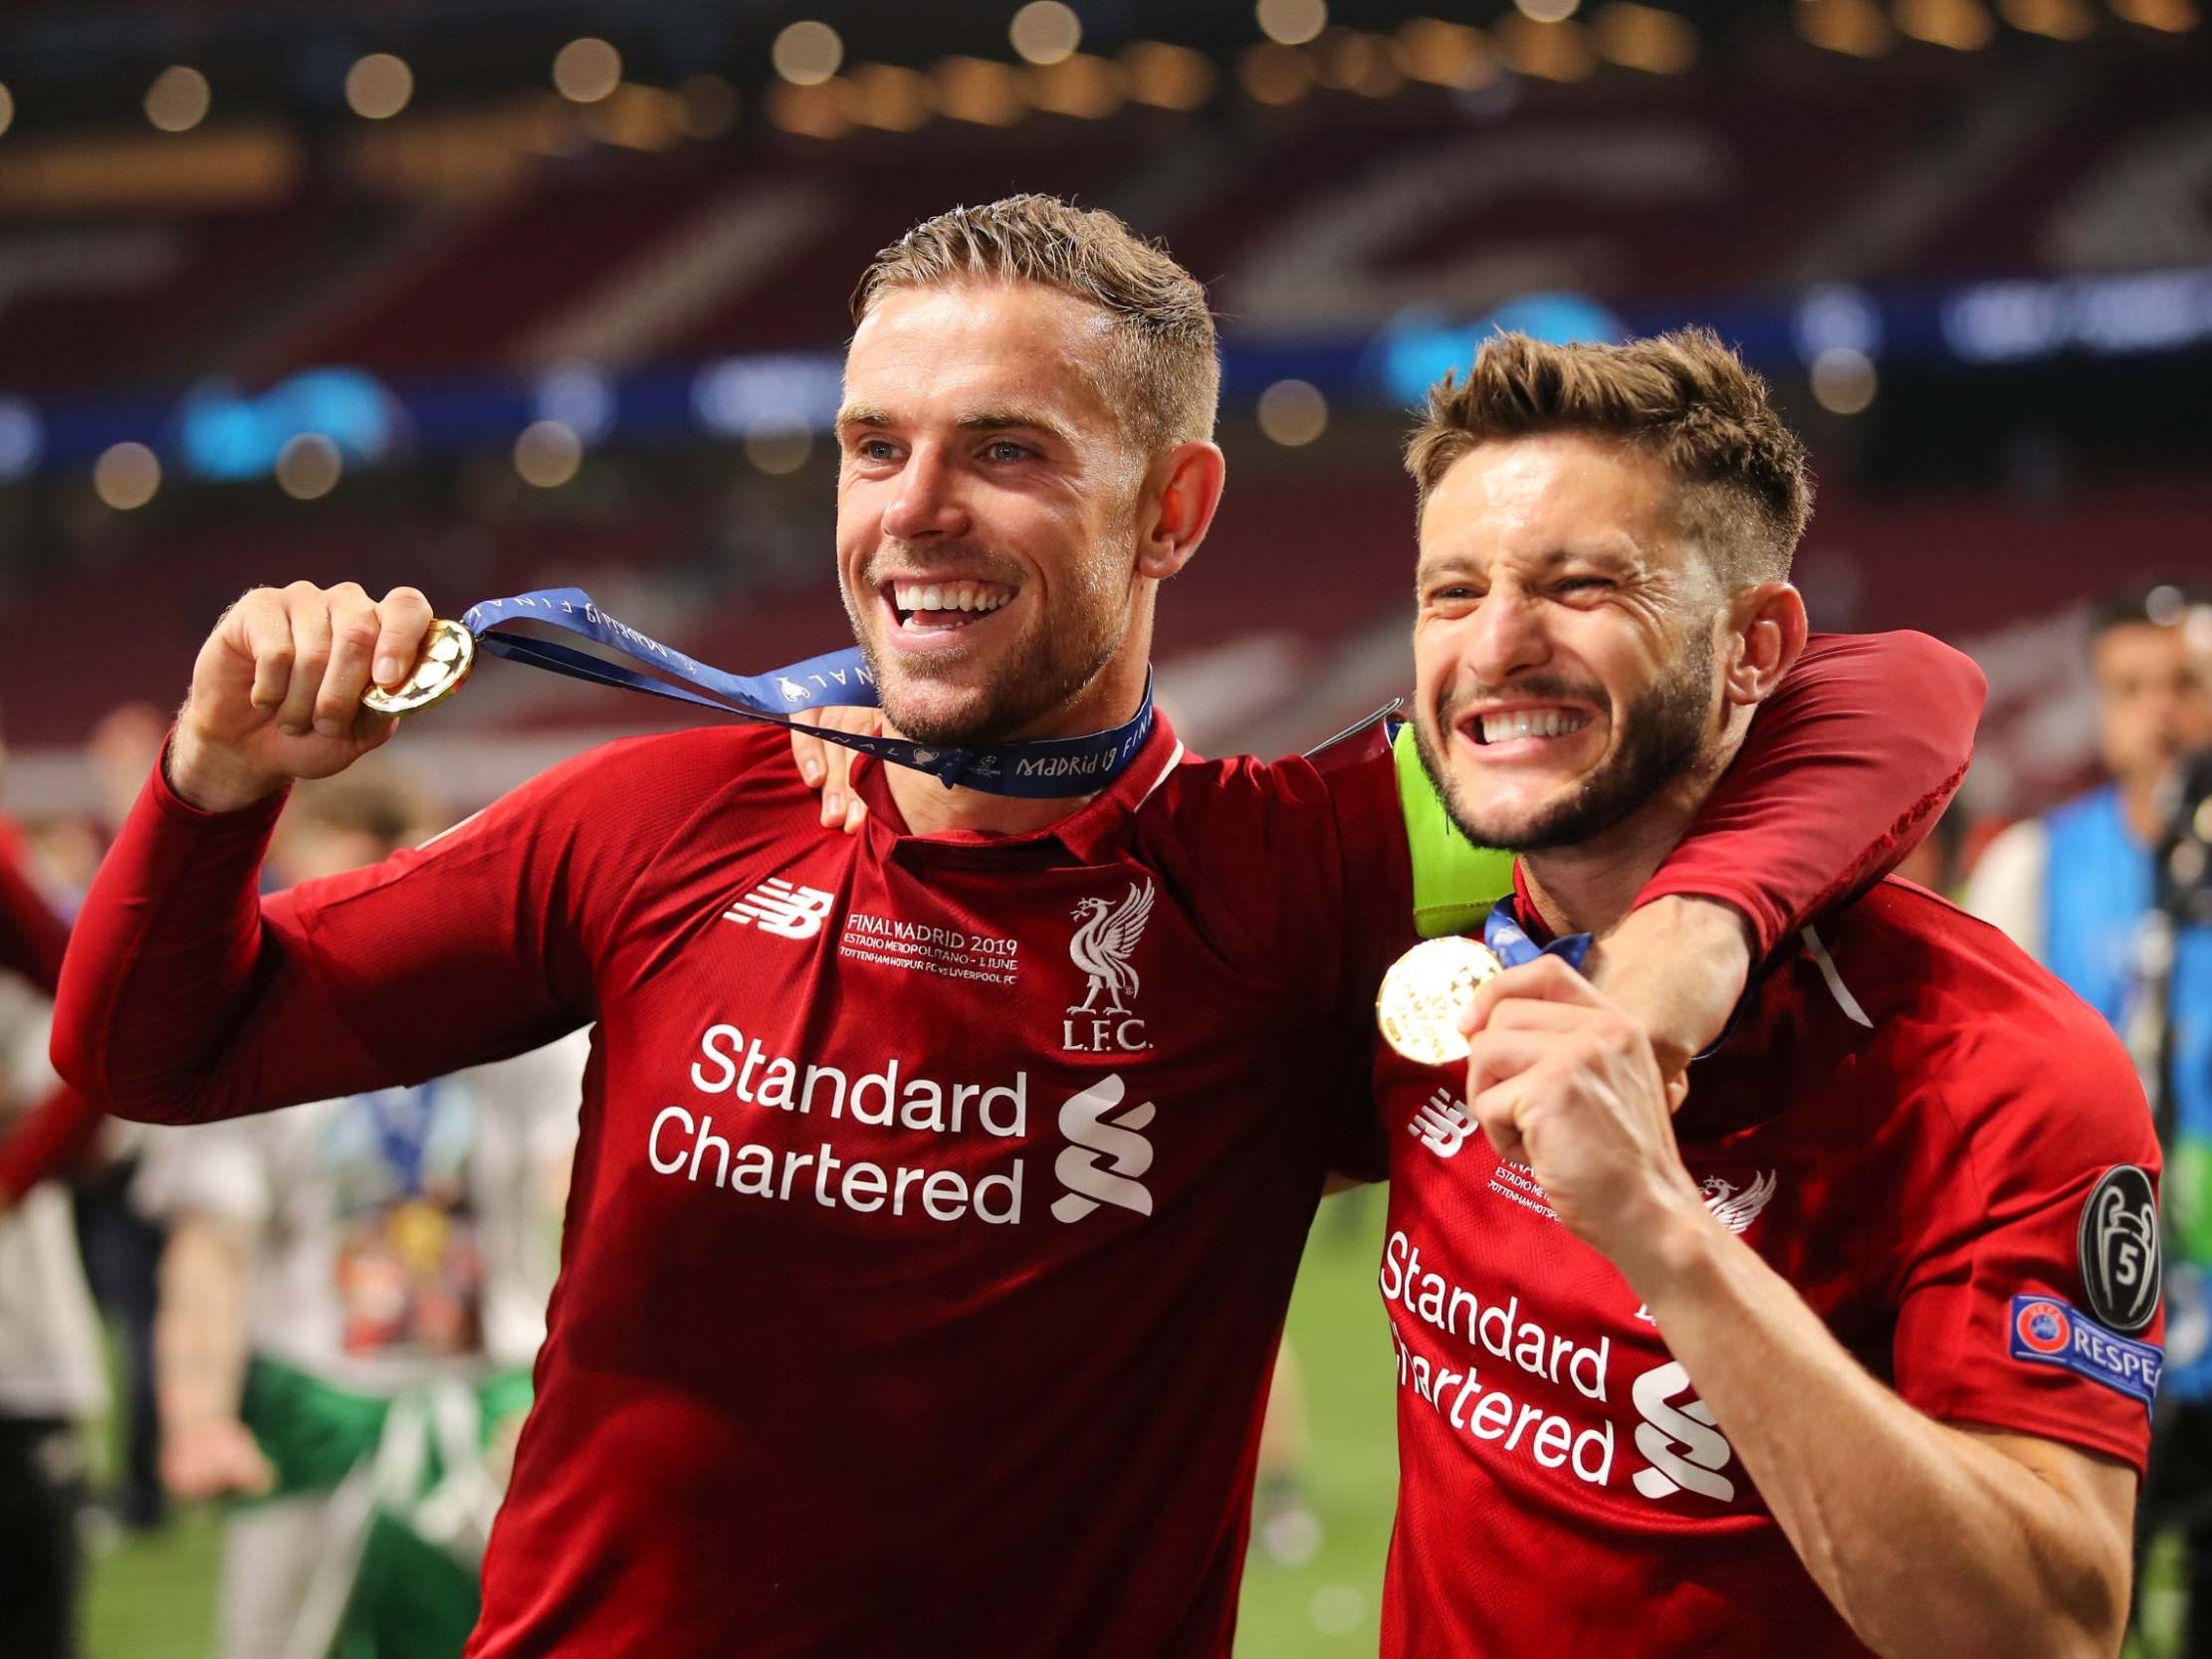 Lallana celebrates with Jordan Hendserson after Champions League final victory